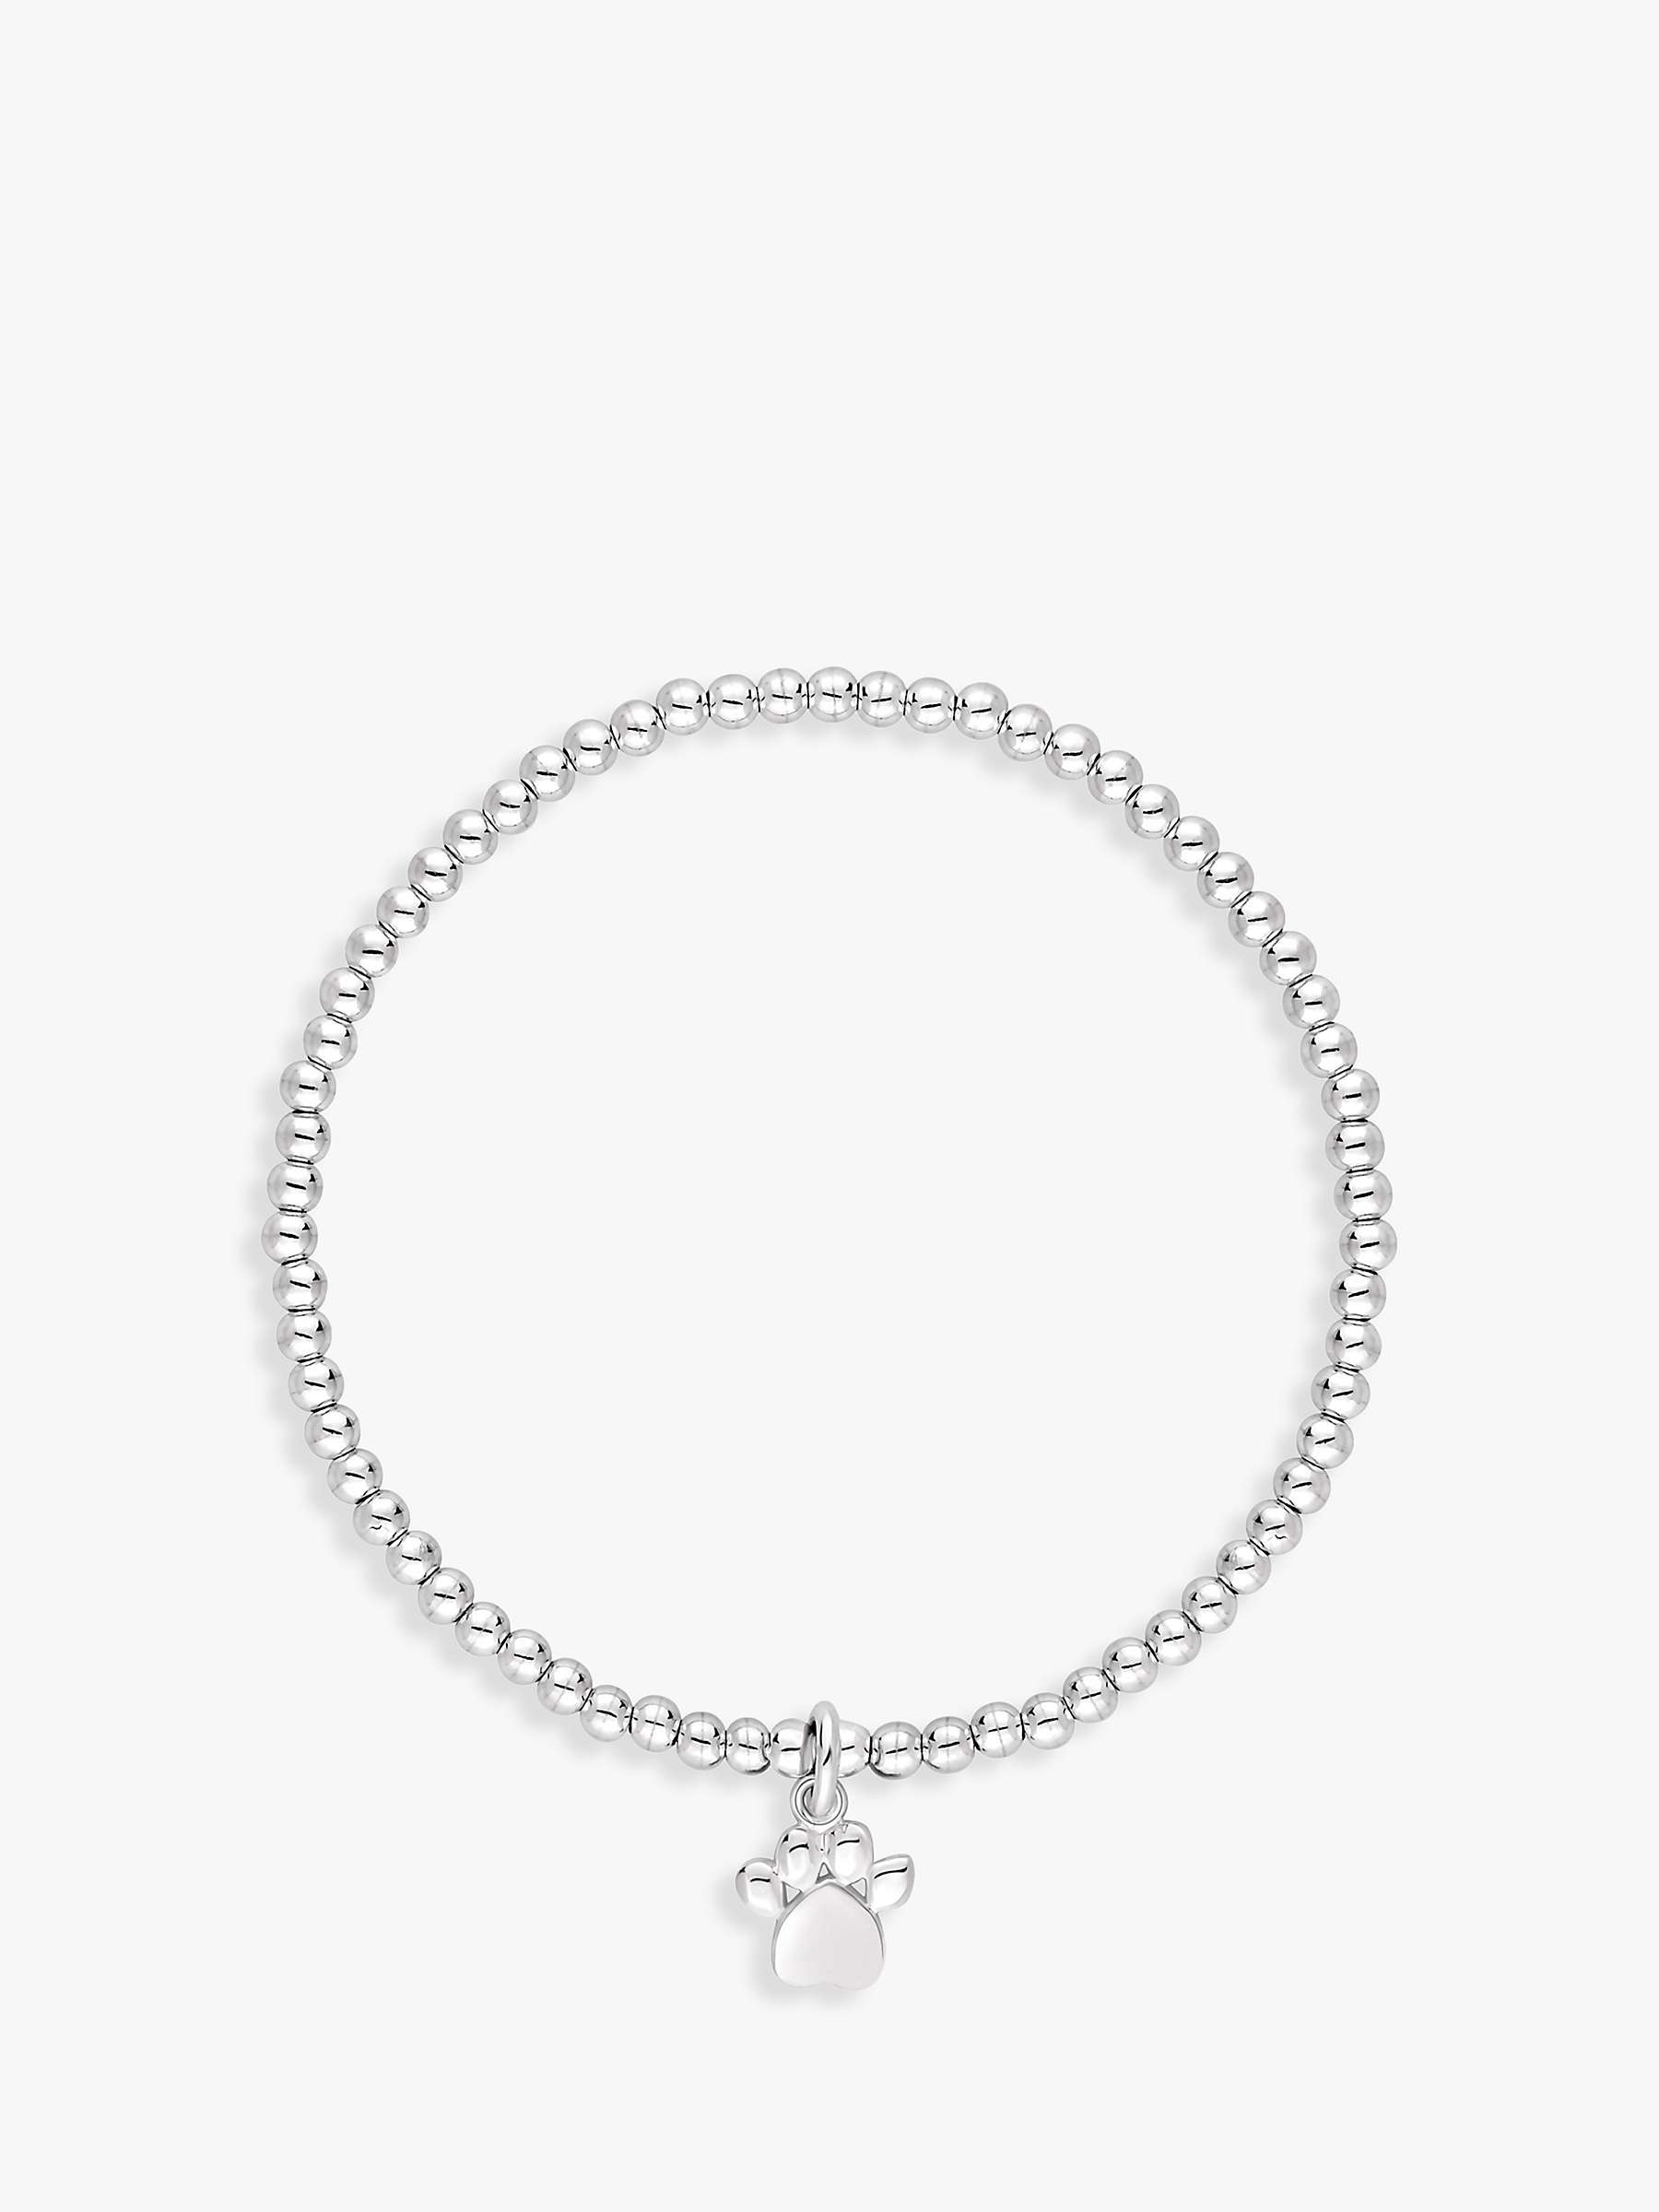 Buy Simply Silver Paw Charm Beaded Stretch Bracelet, Silver Online at johnlewis.com